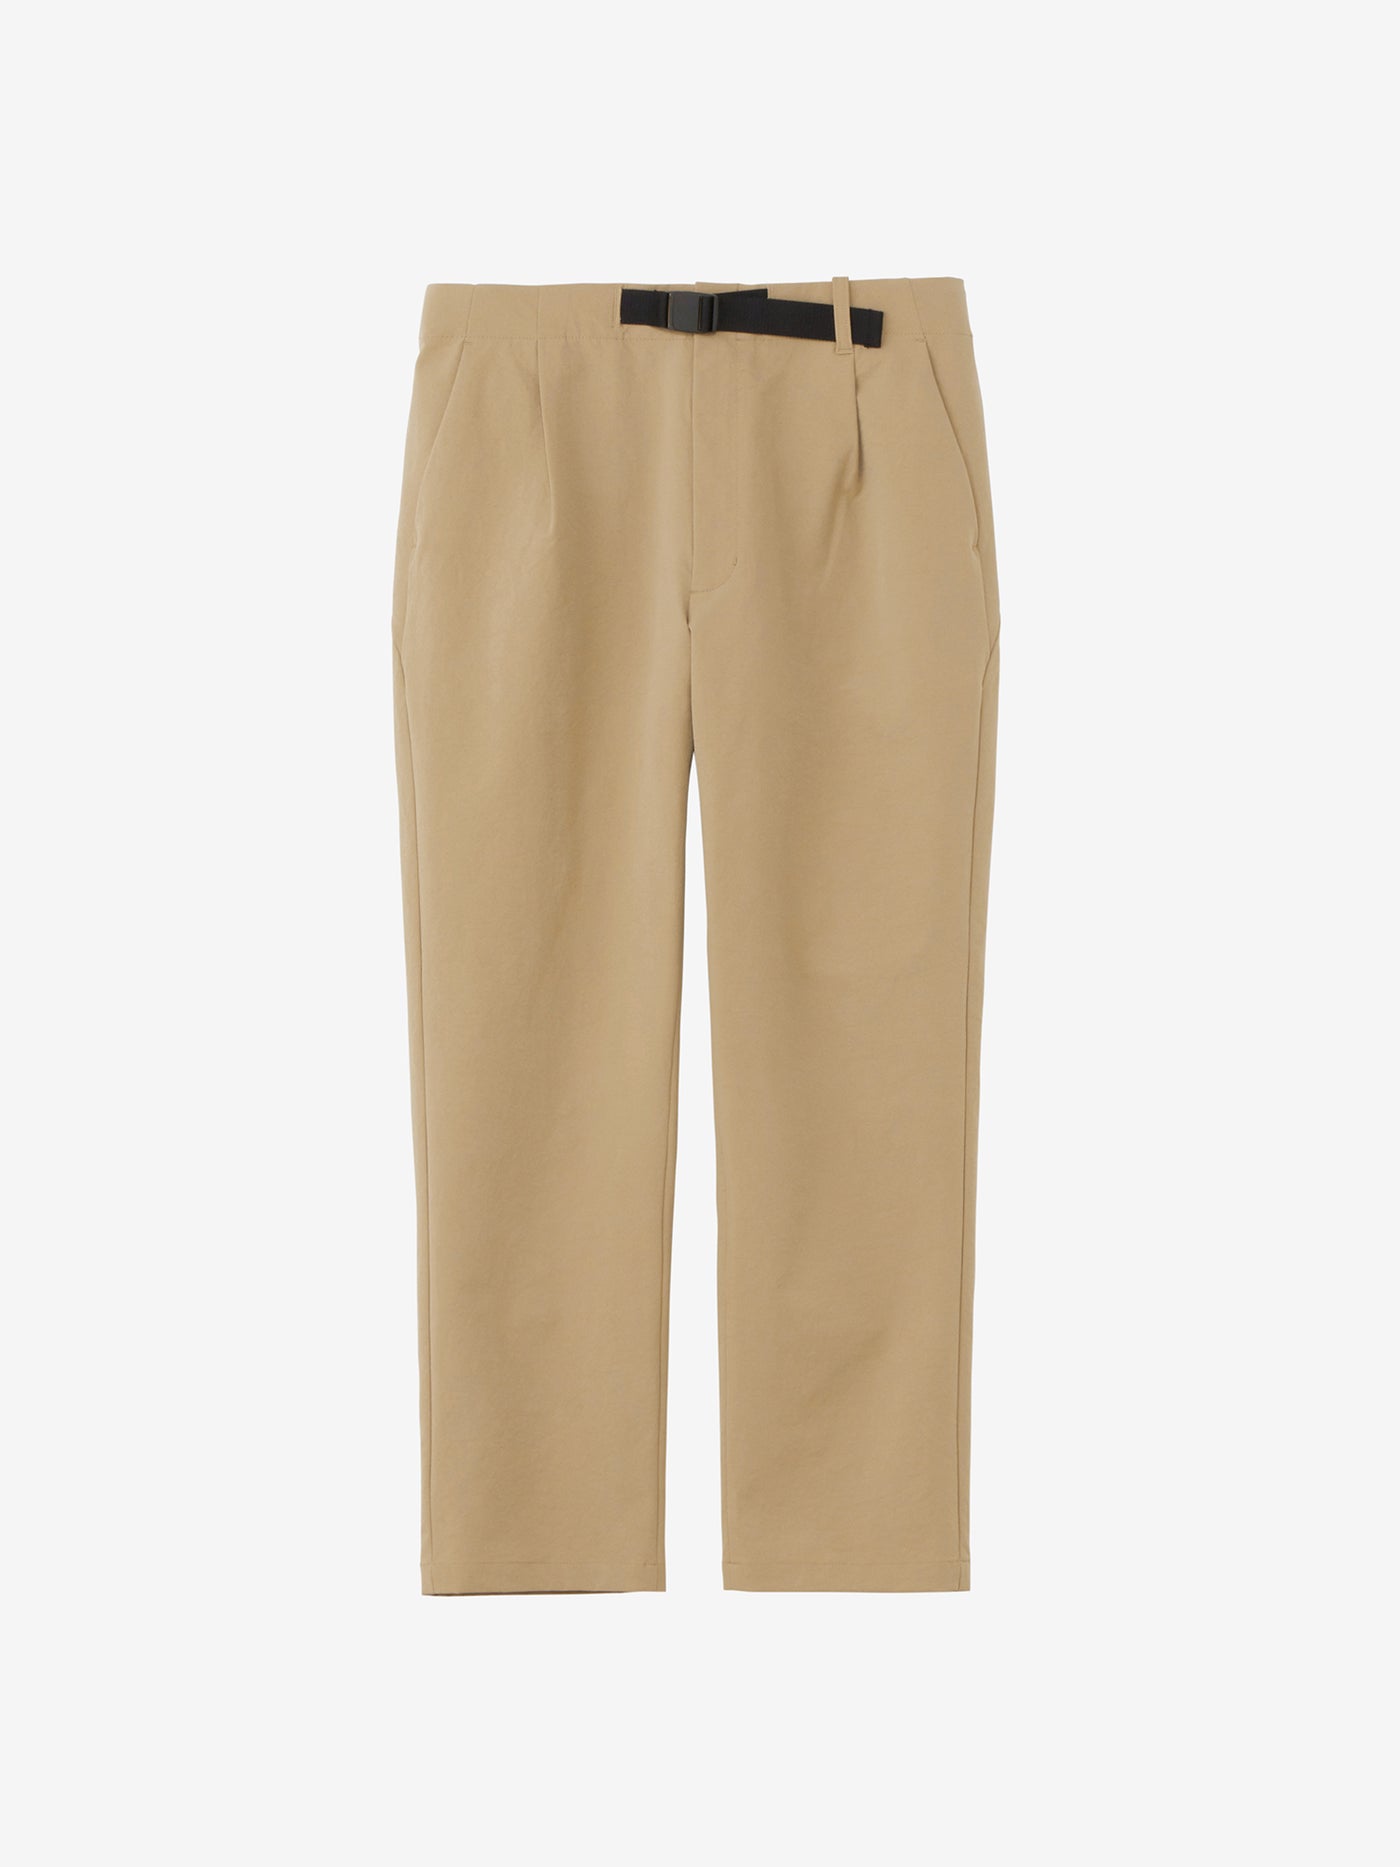 Norse Store  Shipping Worldwide - Goldwin One Tuck Tapered Stretch Pants -  Clay Beige